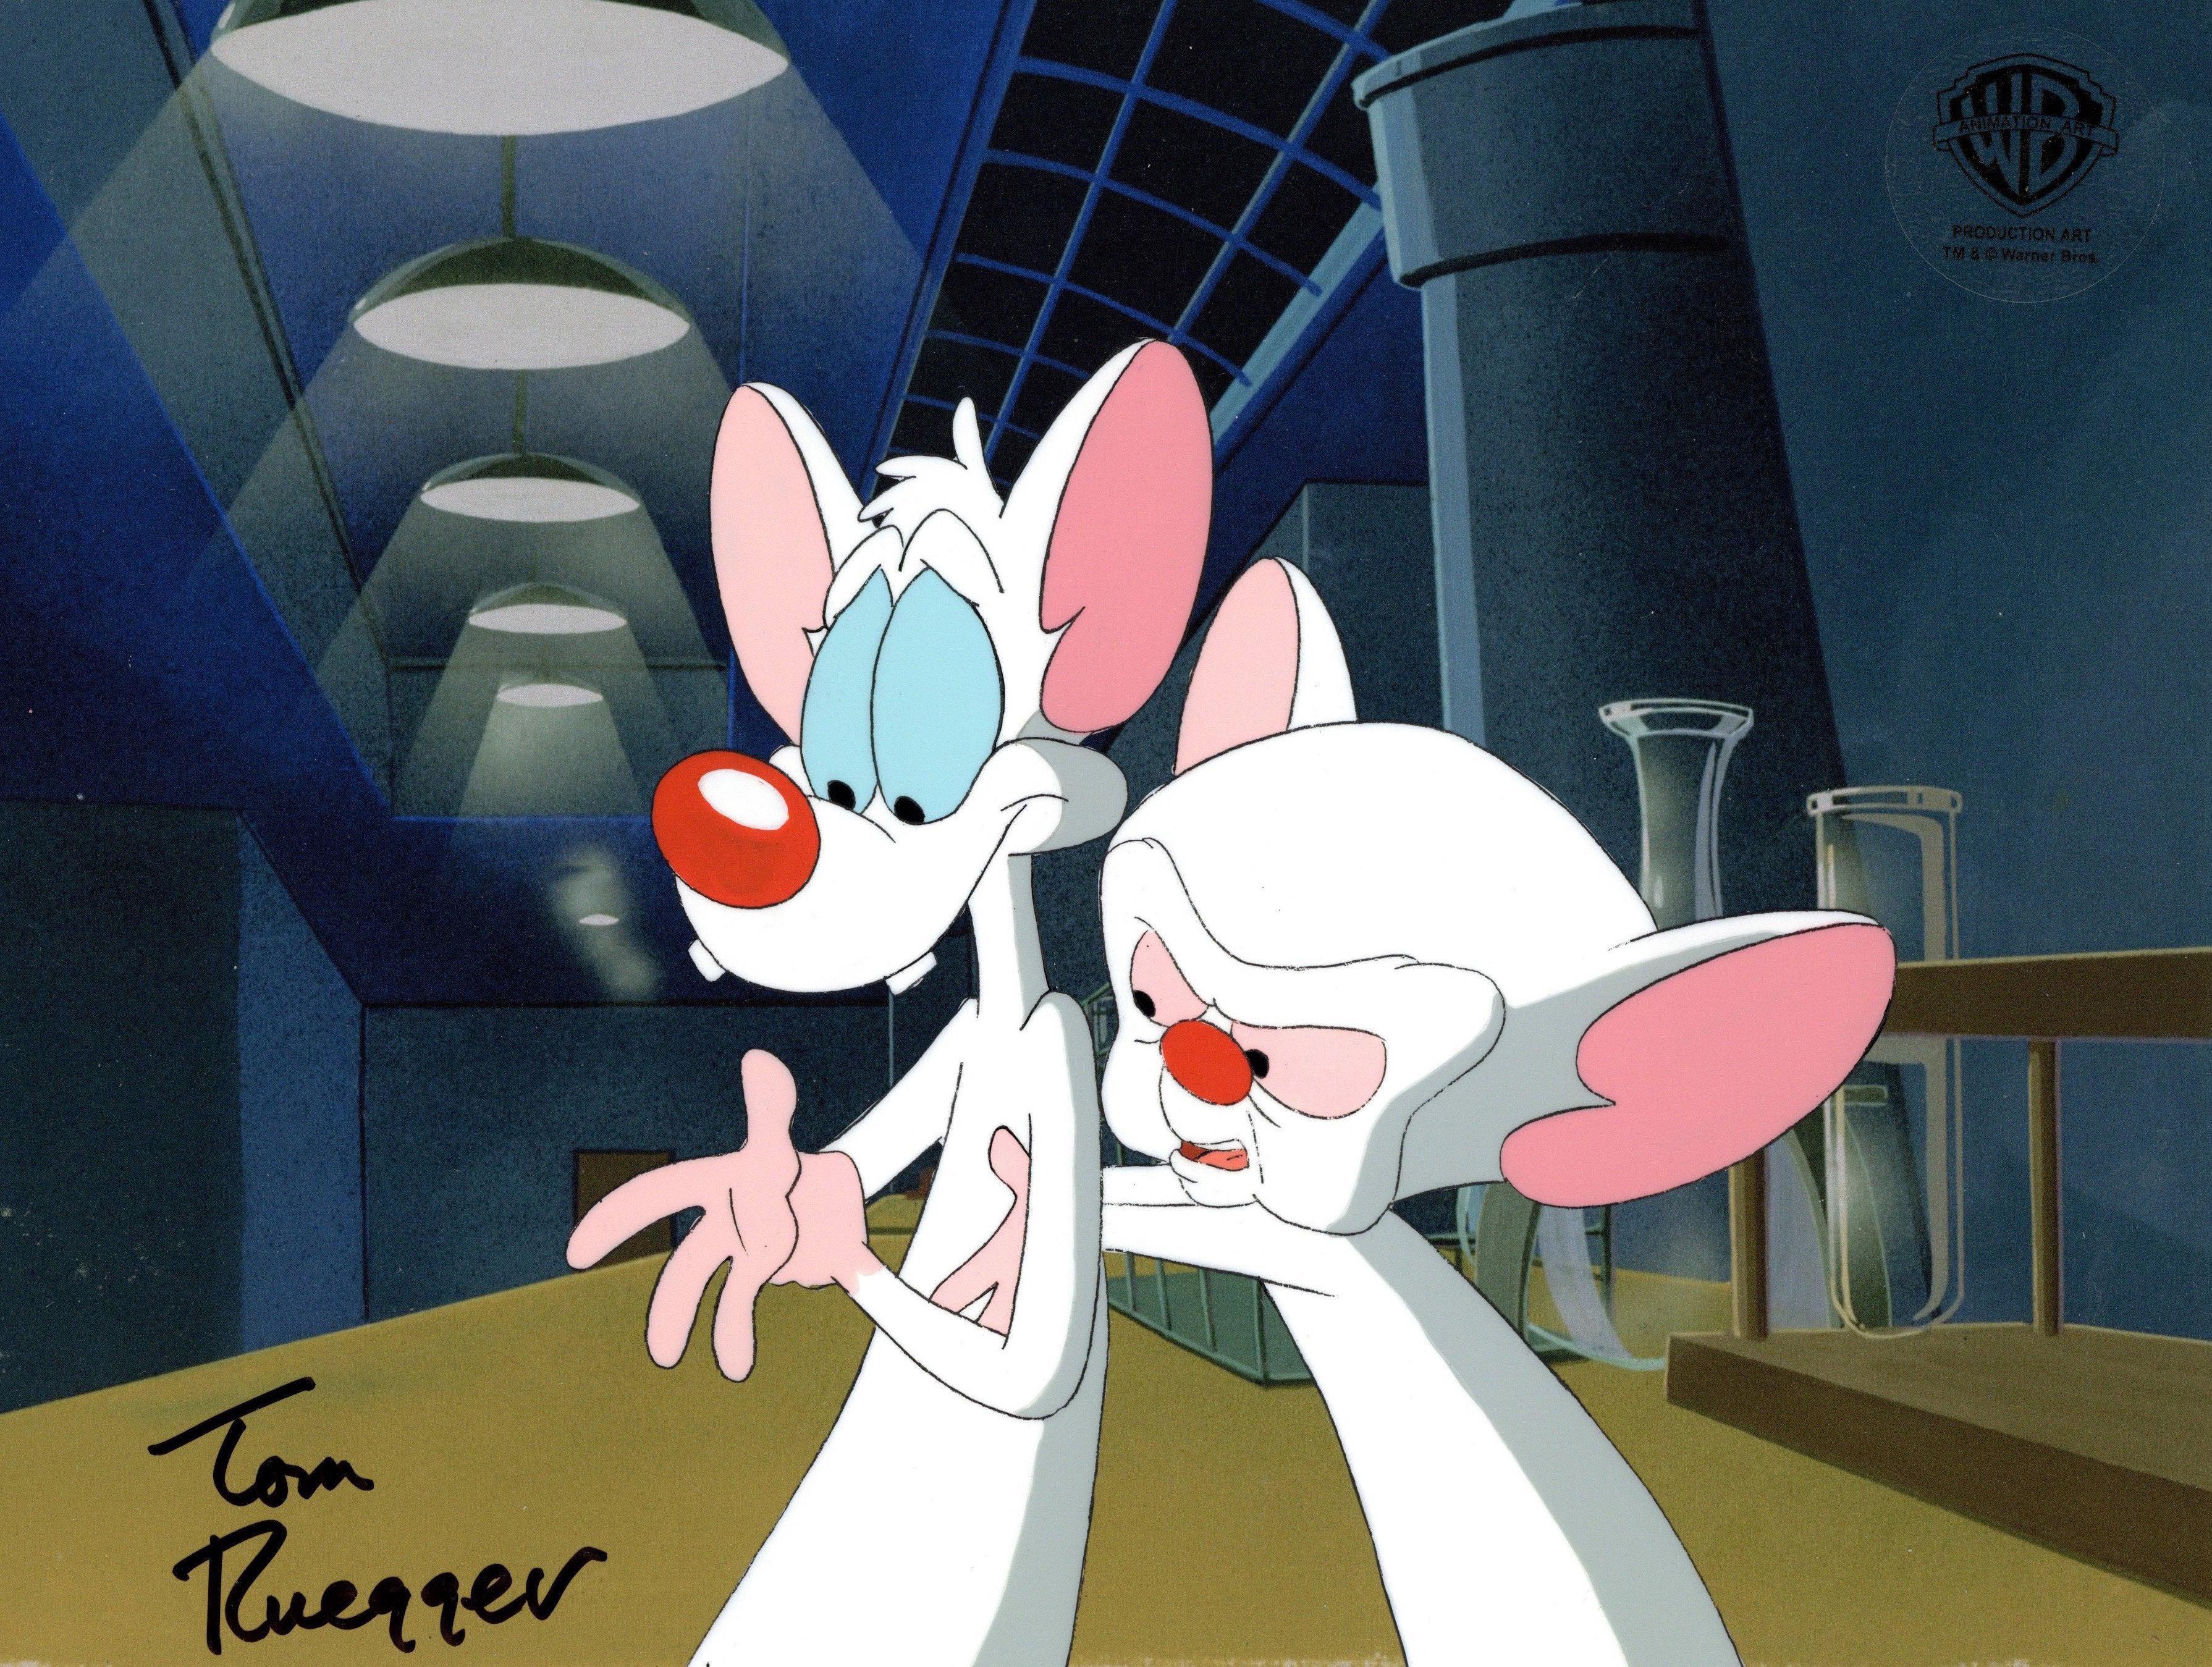 Pinky And The Brain Original Production Cel Signed by Tom Ruegger: Pinky & Brain - Art by Warner Bros. Studio Artists